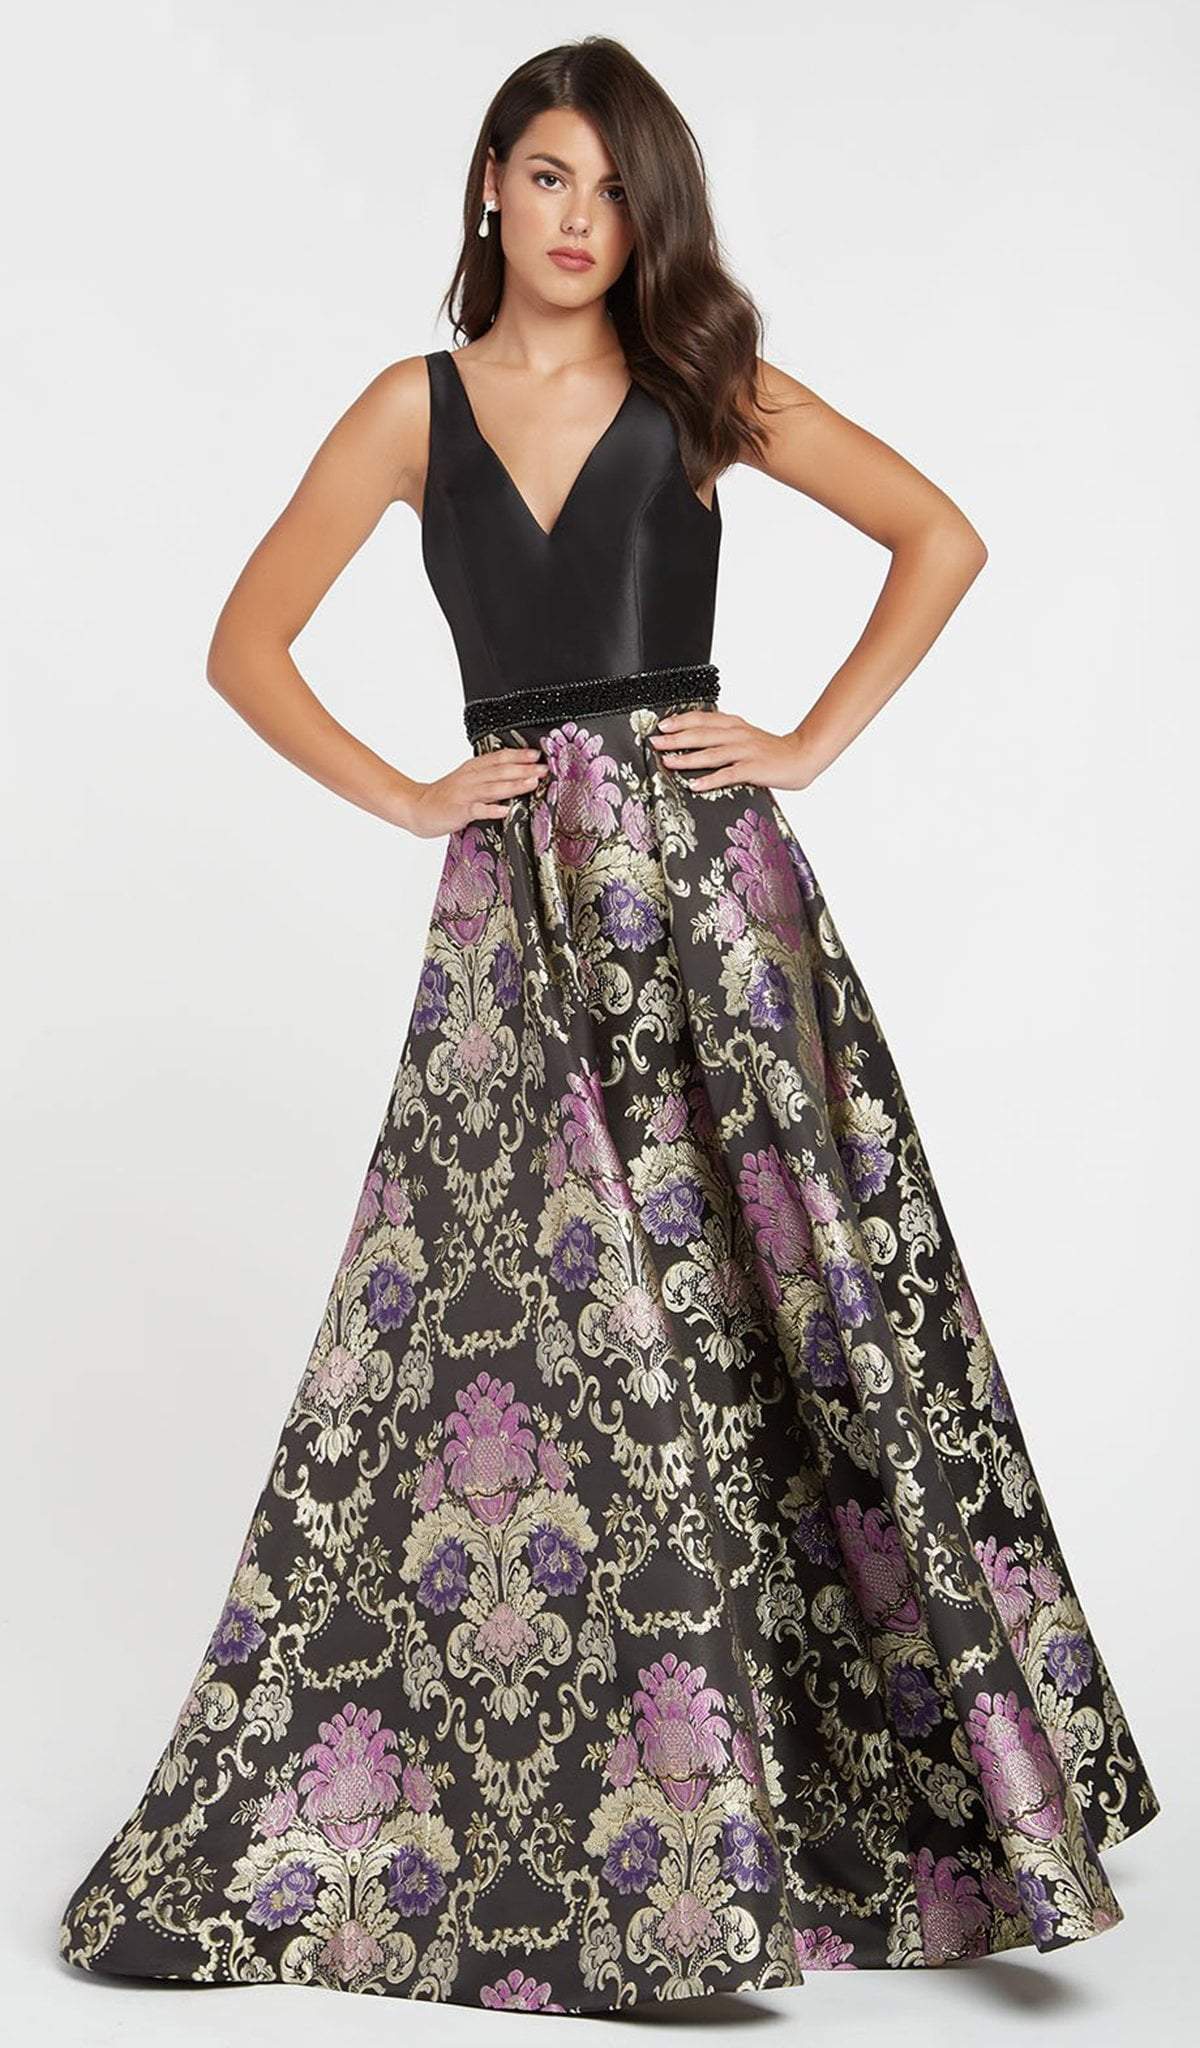 Alyce Paris - 60399 Sleeveless Floral Brocade A-Line Gown In Black and Purple